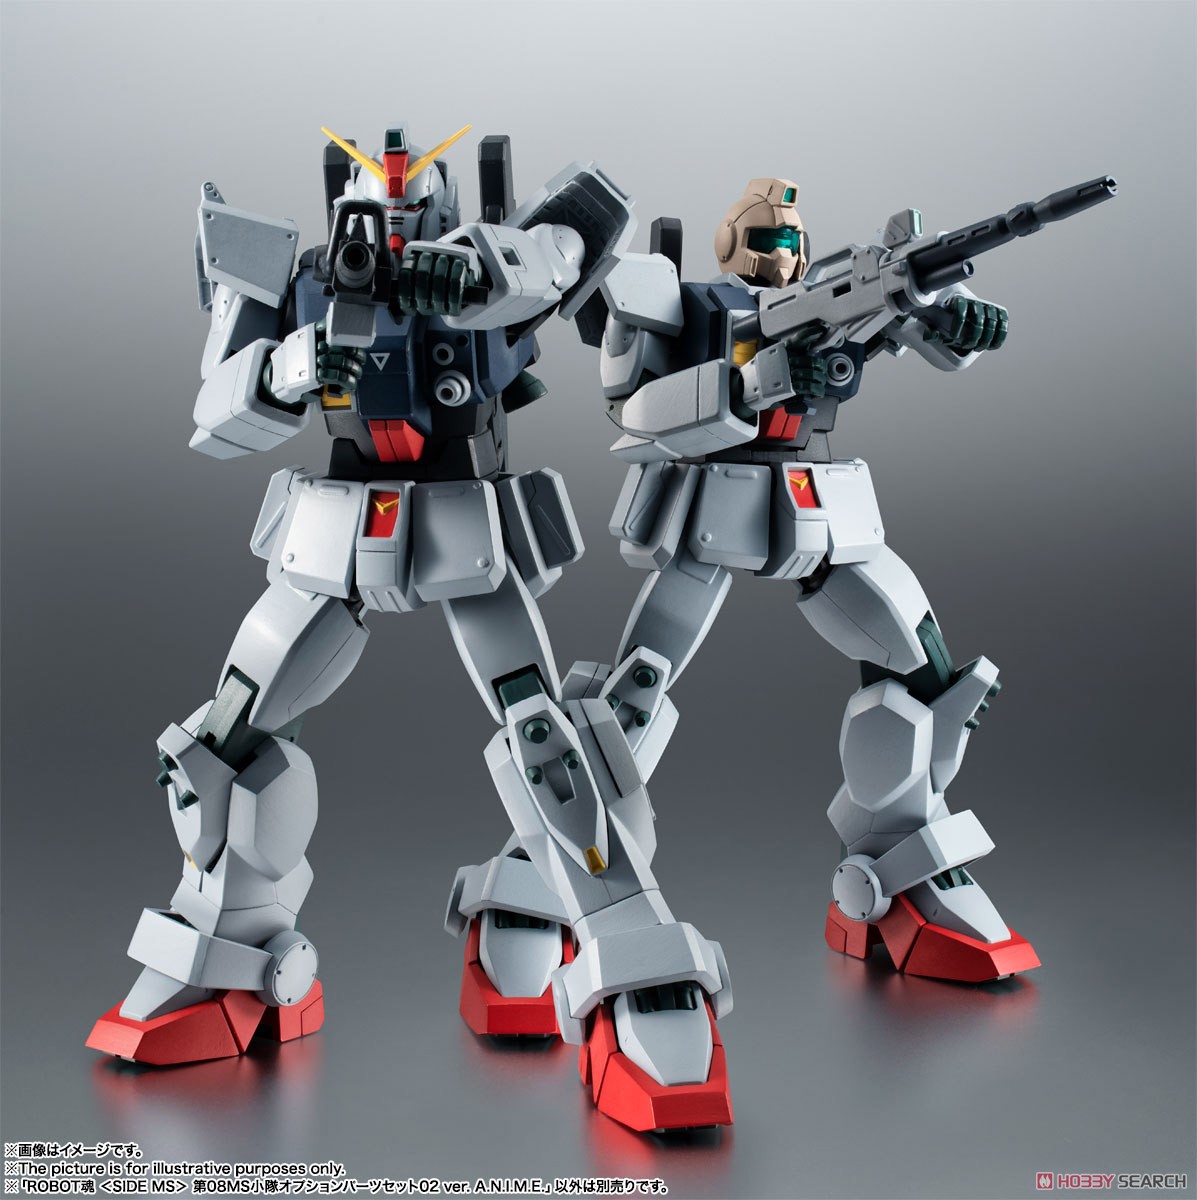 ROBOT魂 ＜ SIDE MS ＞ 第08MS小隊オプションパーツセット02 ver. A.N.I.M.E. (完成品) その他の画像6